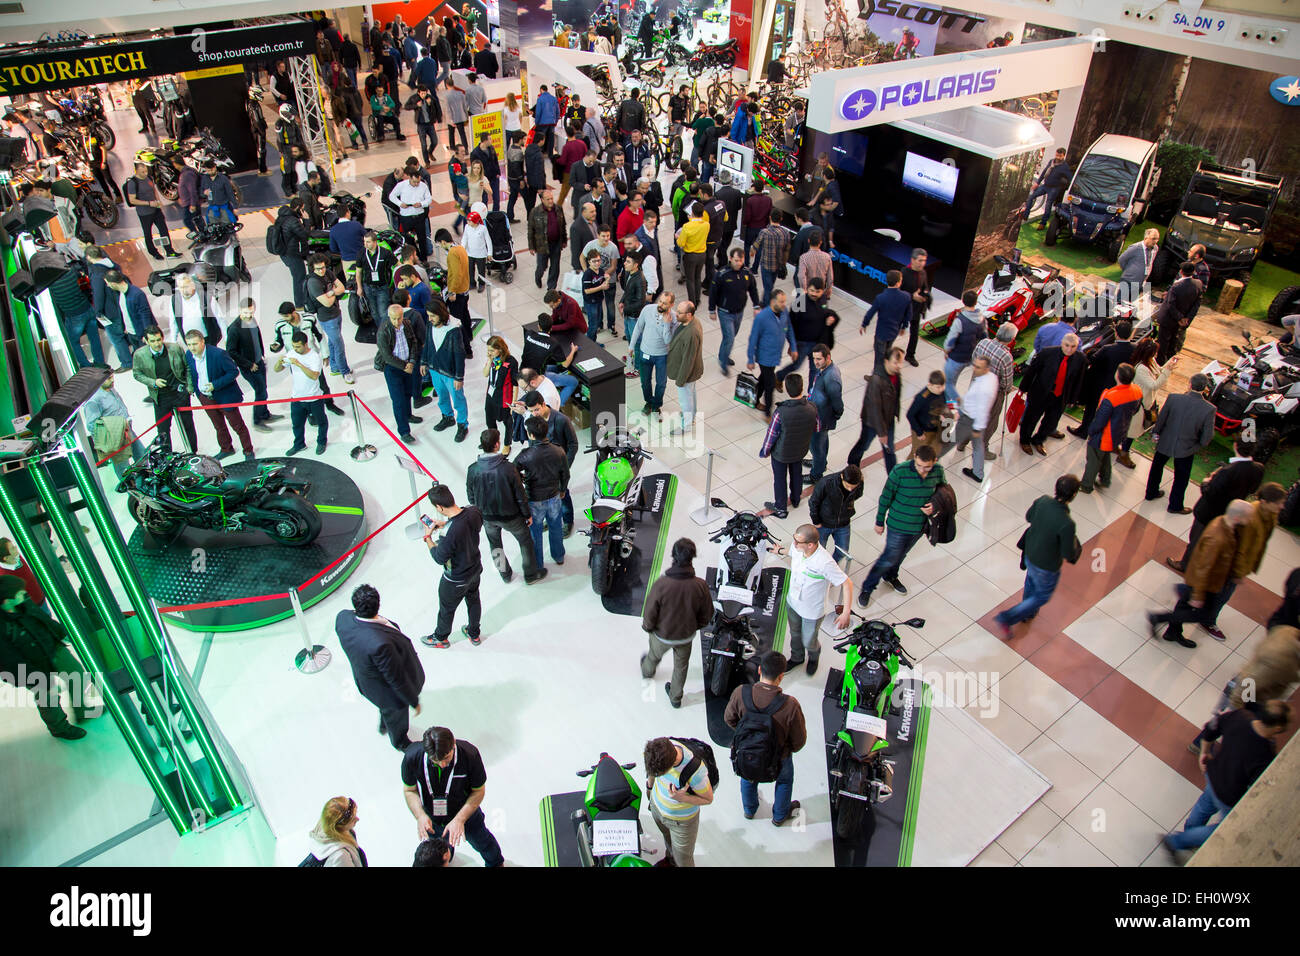 ISTANBUL, TURKEY - FEBRUARY 27, 2015: People visiting motorcycles on display at Eurasia motobike expo 2015, CNR Expo. Stock Photo